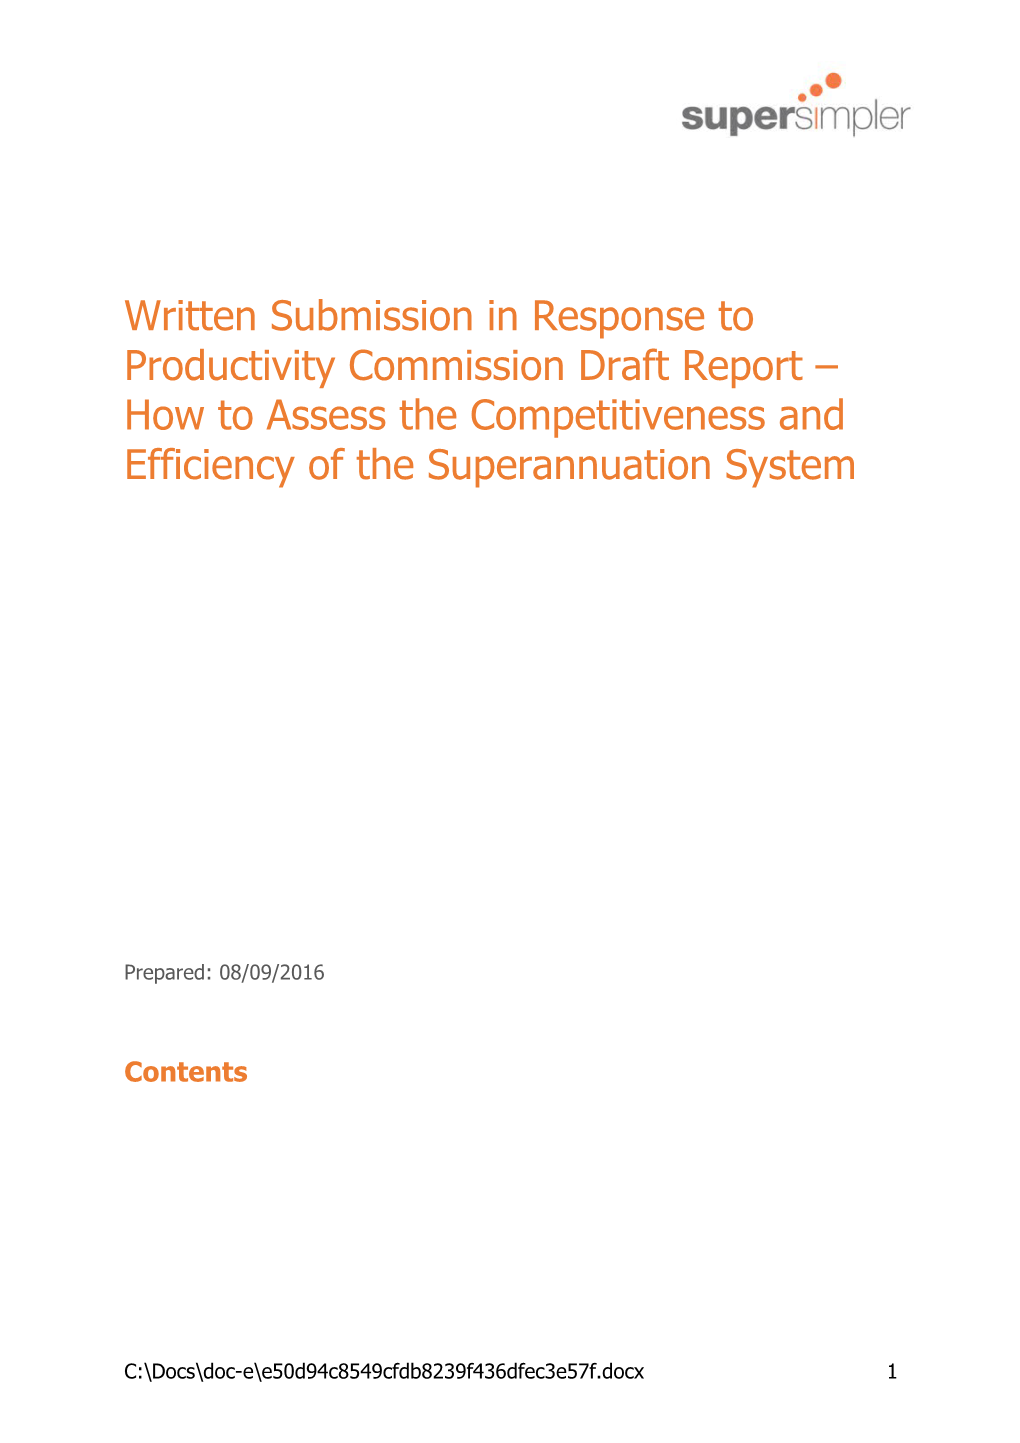 Submission DR87 - Super Simpler - Superannuation Competitiveness and Efficiency - Commissioned